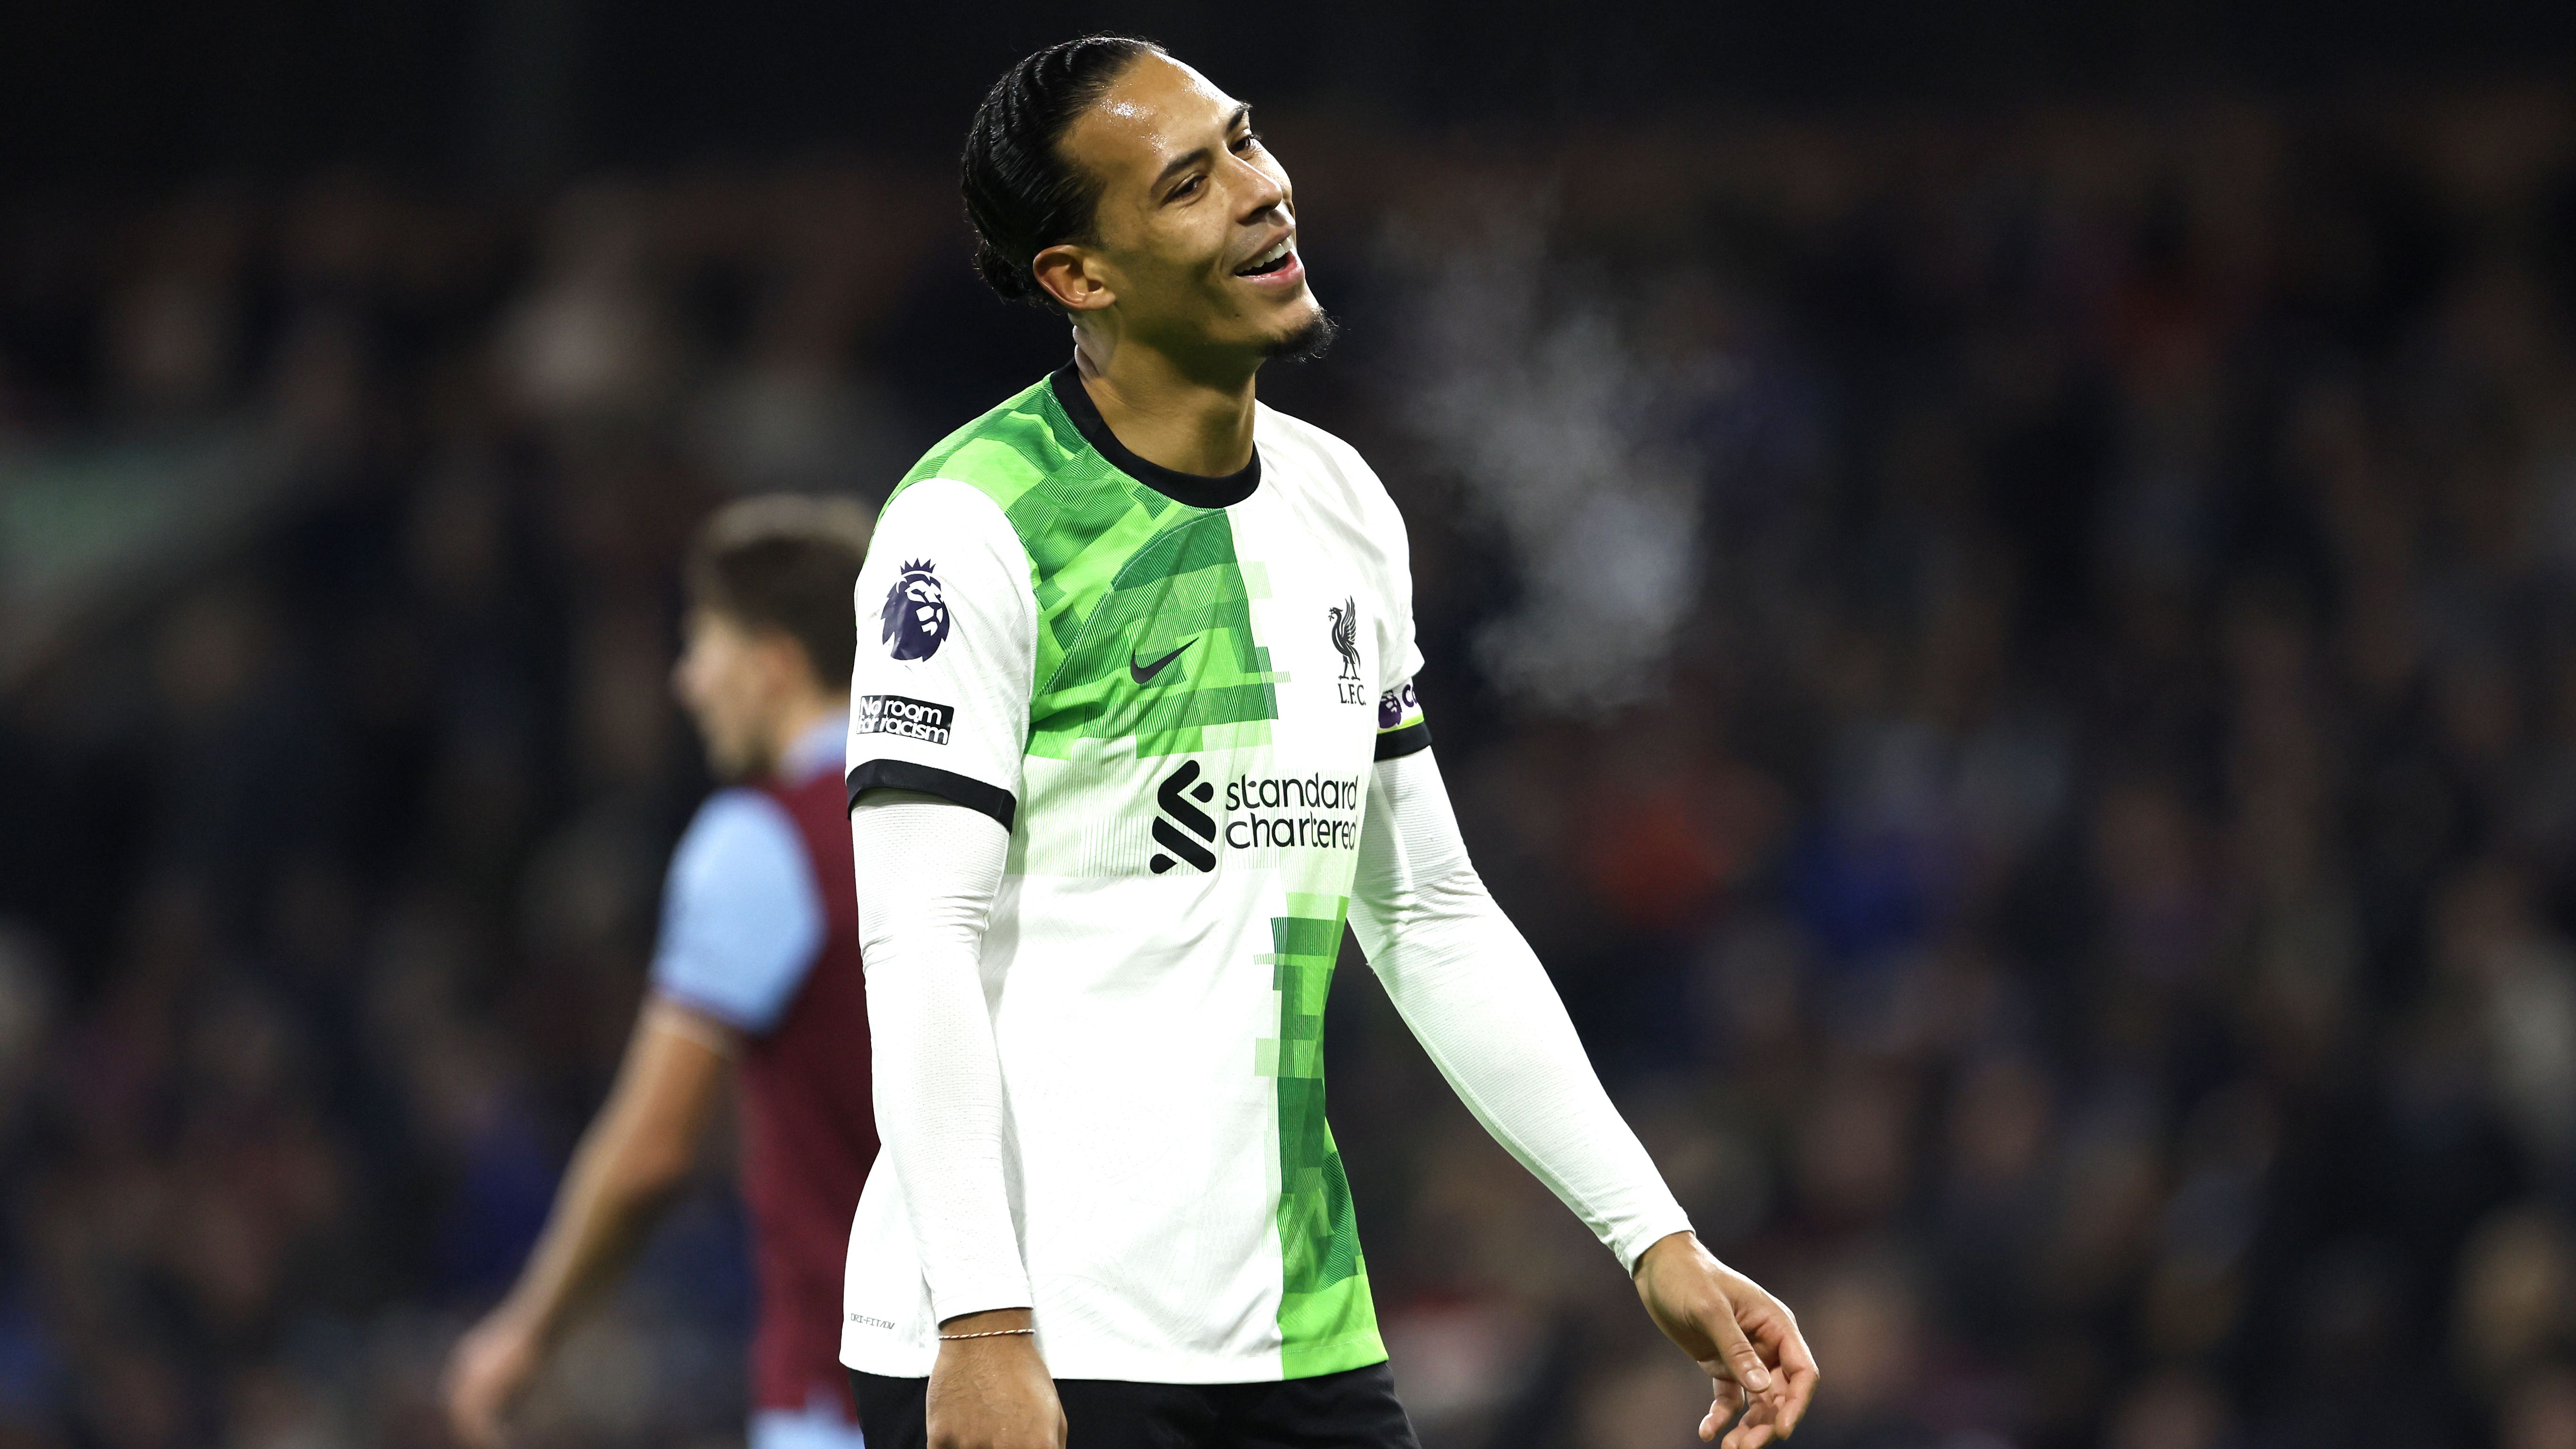 Virgil van Dijk says he spent time off with family rather than watching football